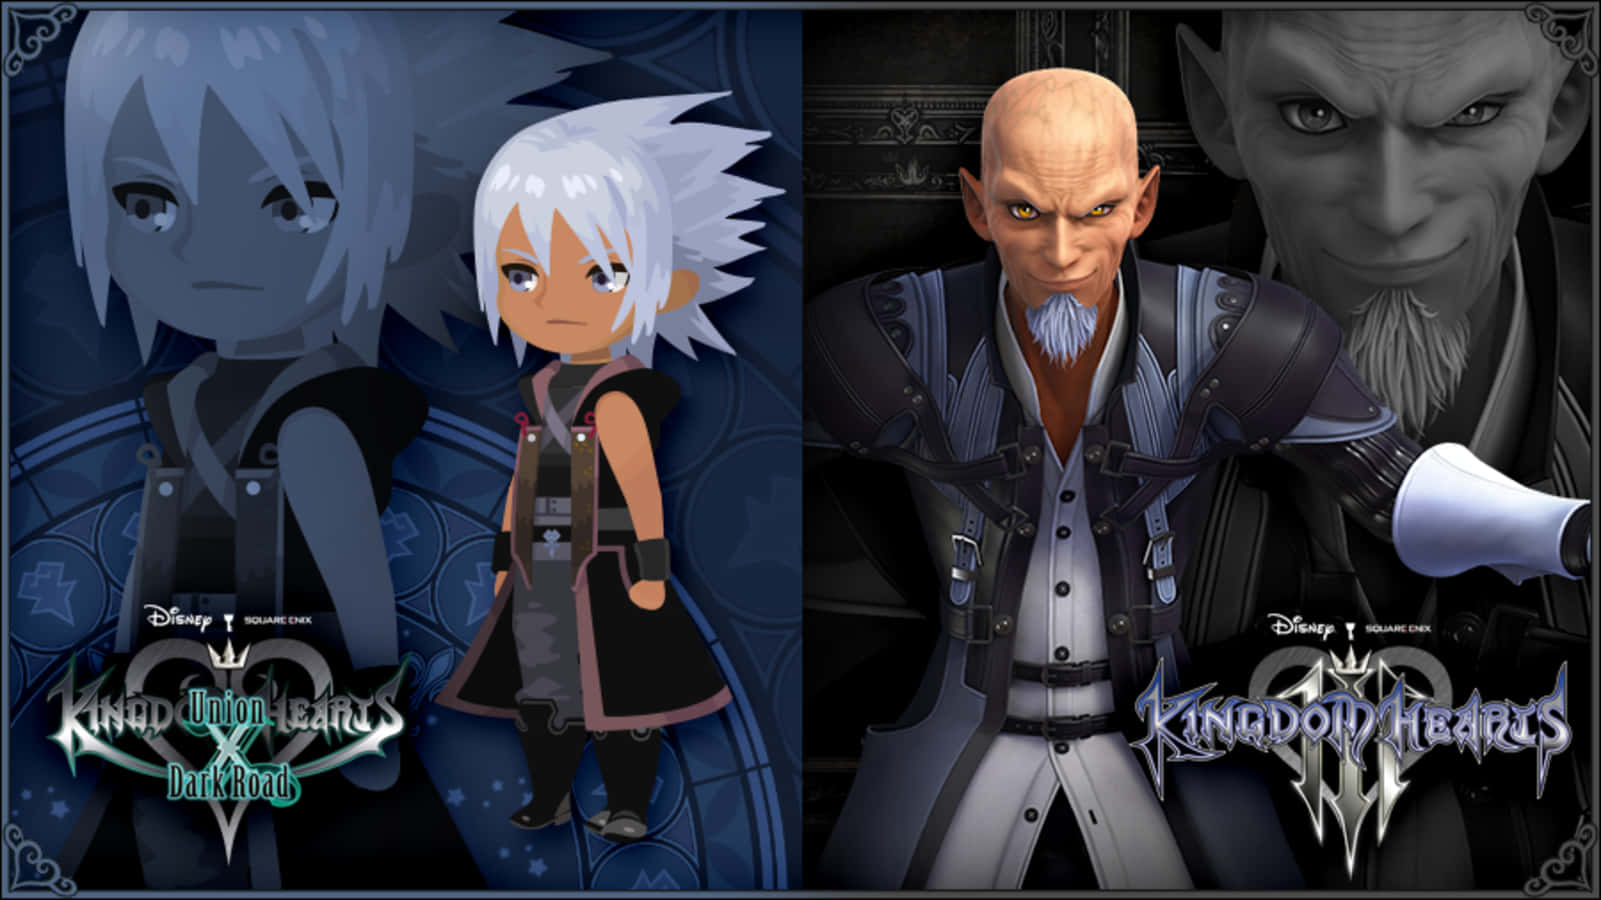 Master Xehanort, the powerful antagonist in the mesmerizing world of Kingdom Hearts Wallpaper